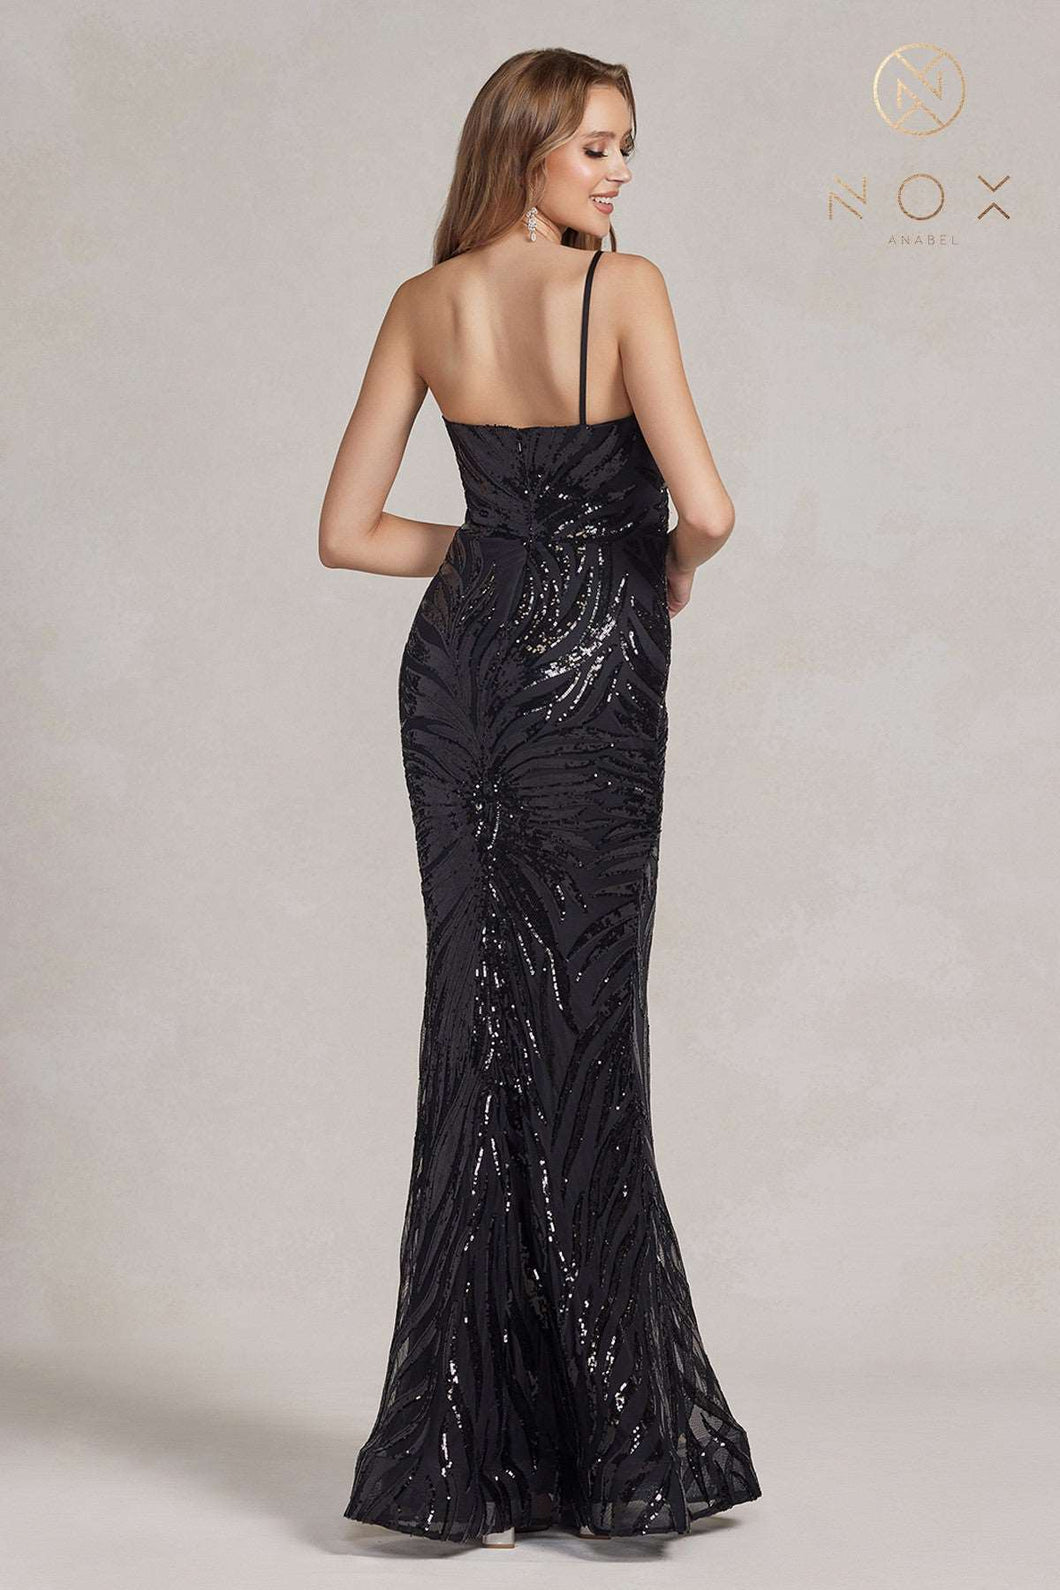 N R1204 - Fit & Flare One Shoulder Prom Gown with Full Sequin Design PROM GOWN Nox 00 BLACK 